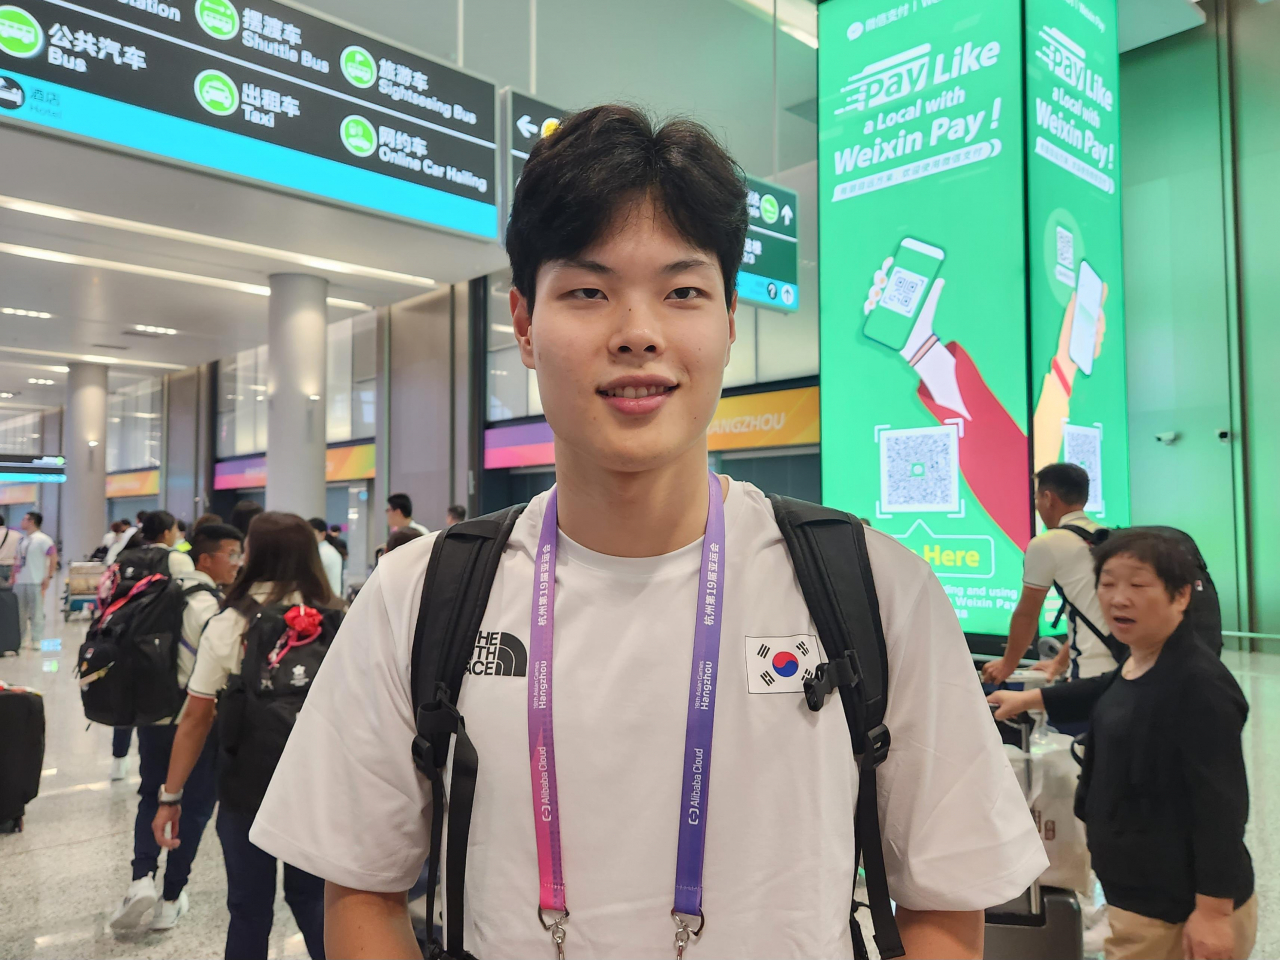 South Korean swimmer Lee Ho-joon speaks to reporters at Hangzhou Xioashan International Airport in Hangzhou, China, on Thursday after arriving in the host city of the 19th Asian Games. (Yonhap)